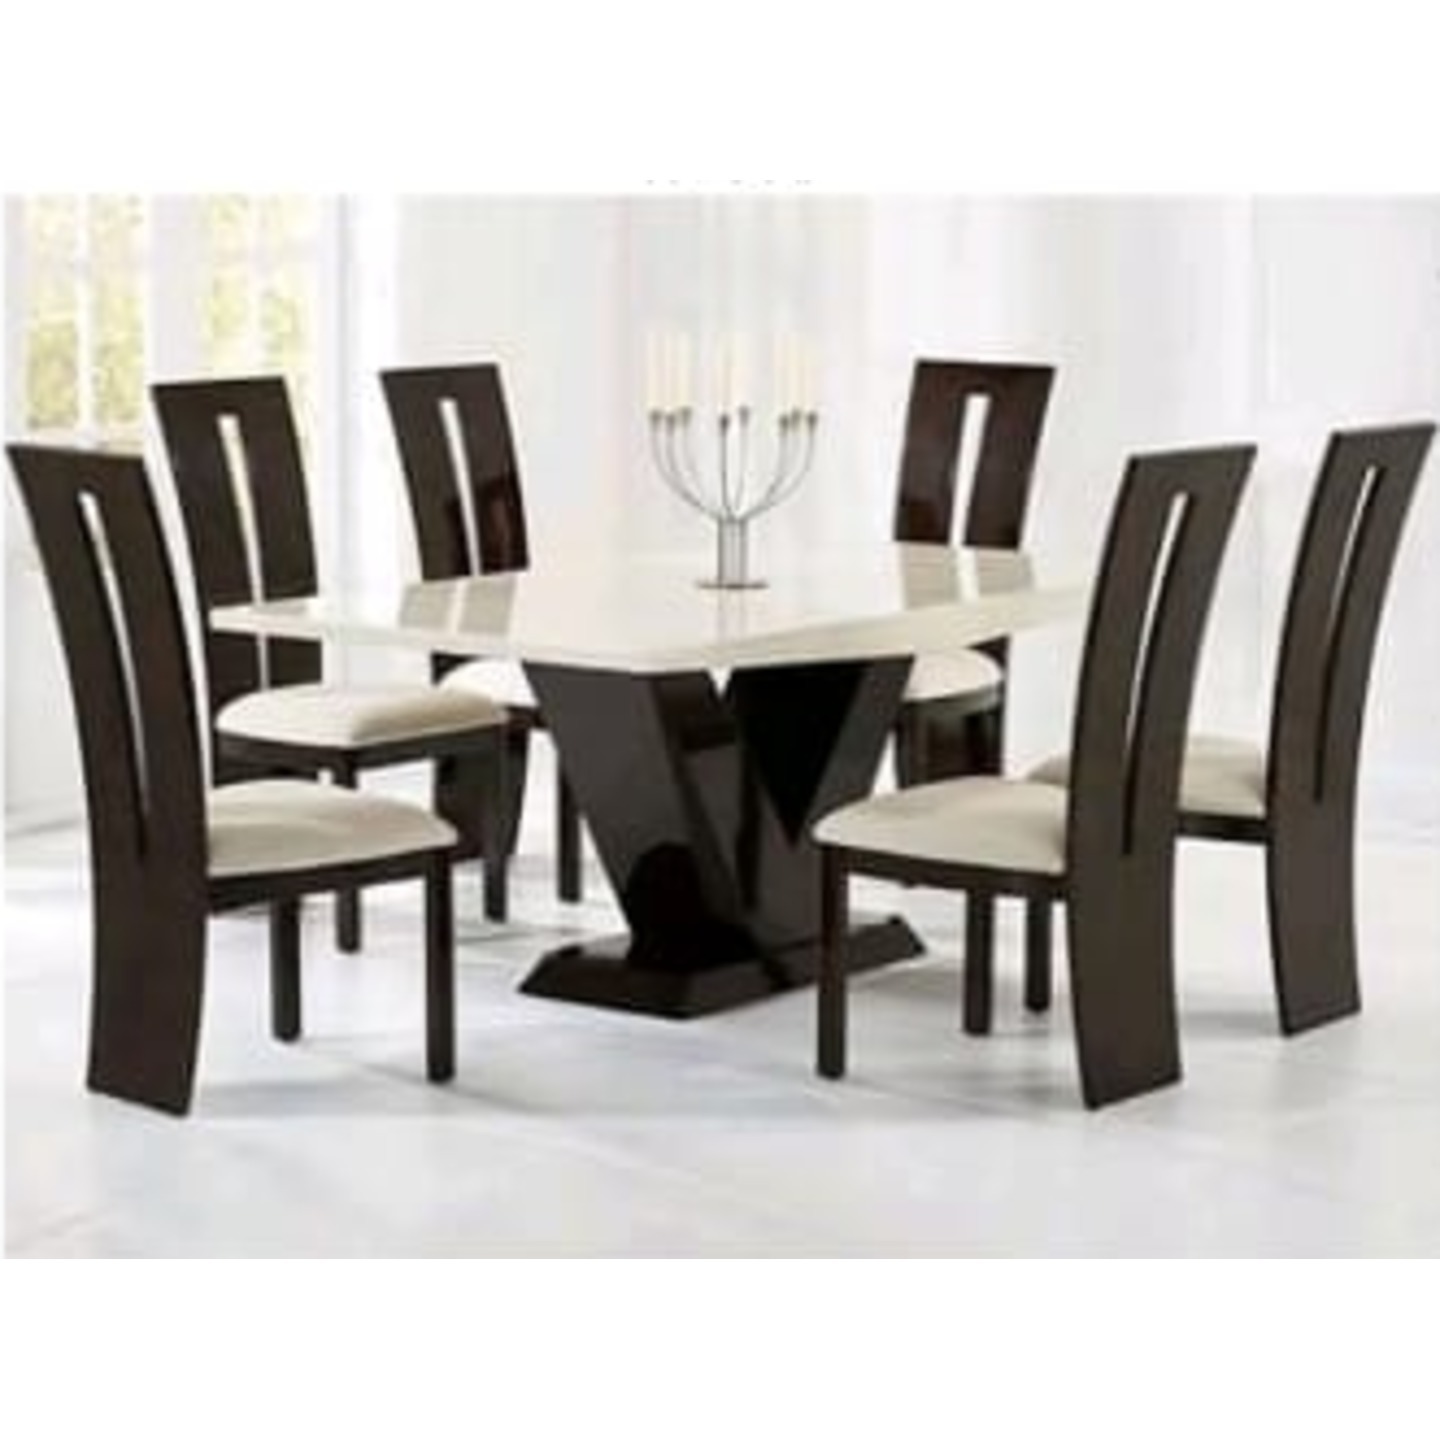 DW Marble Top H-003  Four Seater Dining Table Set in Brown Colour